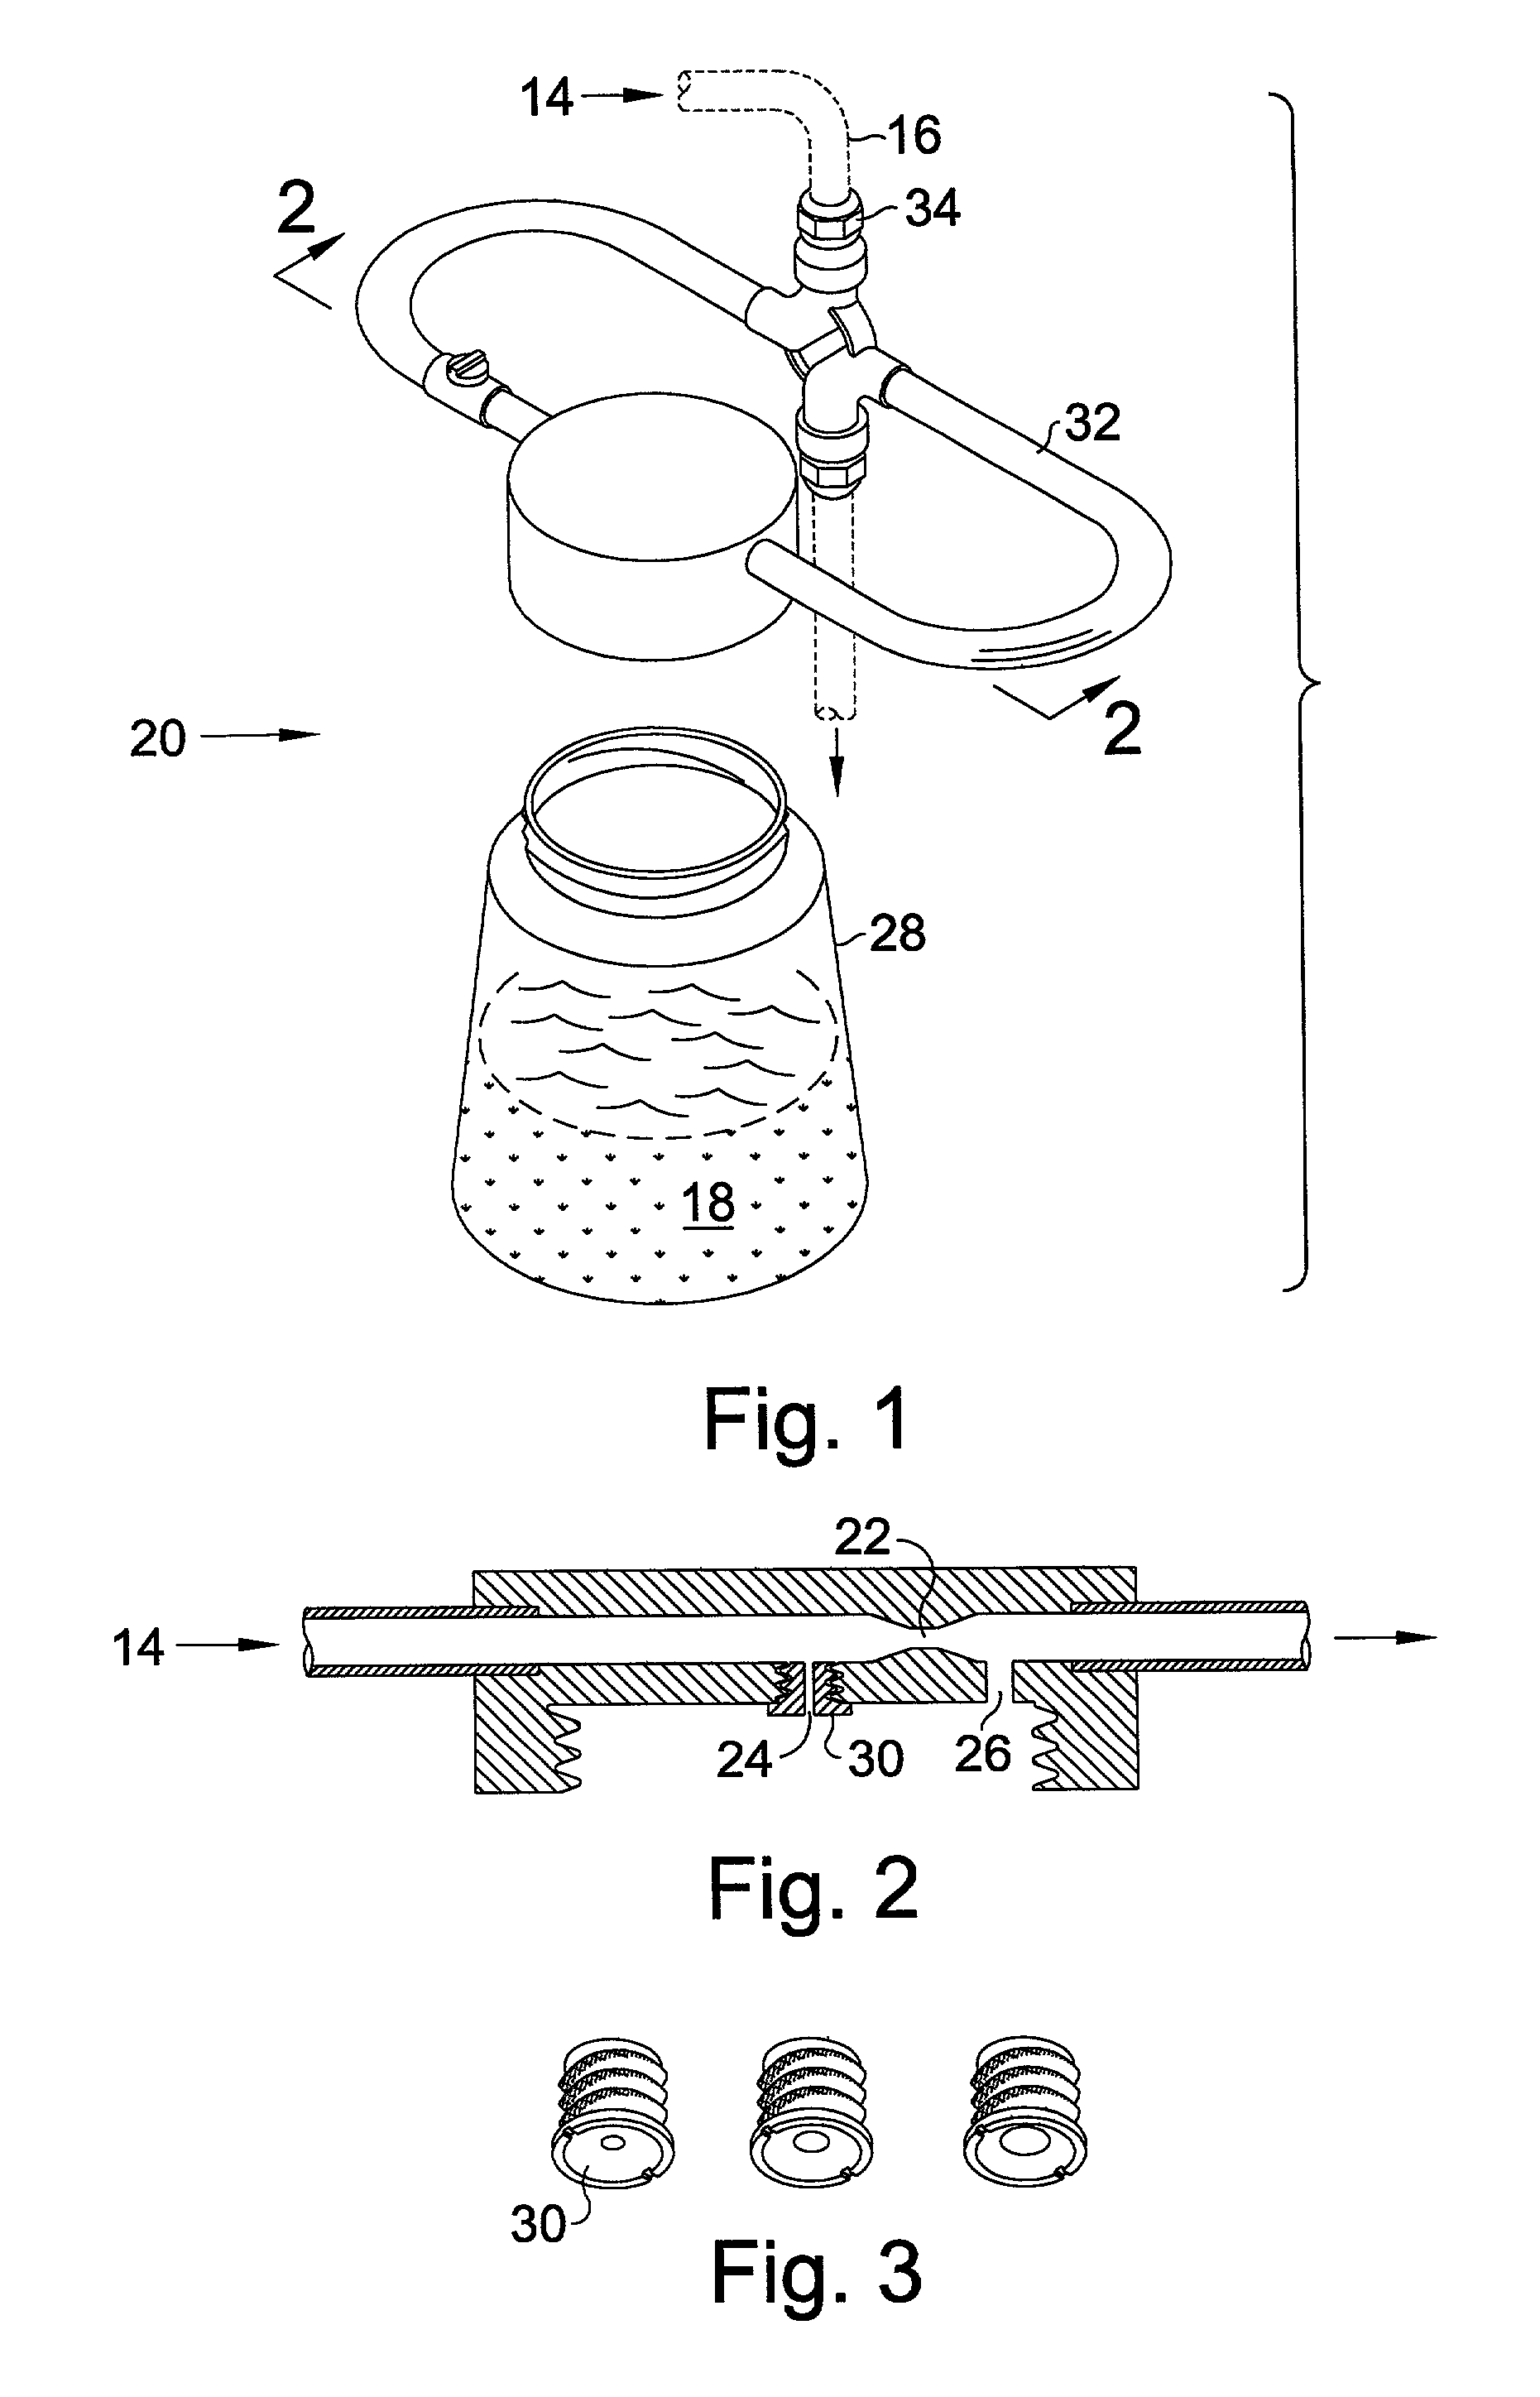 Method of maintaining a yard having a sprinkling system